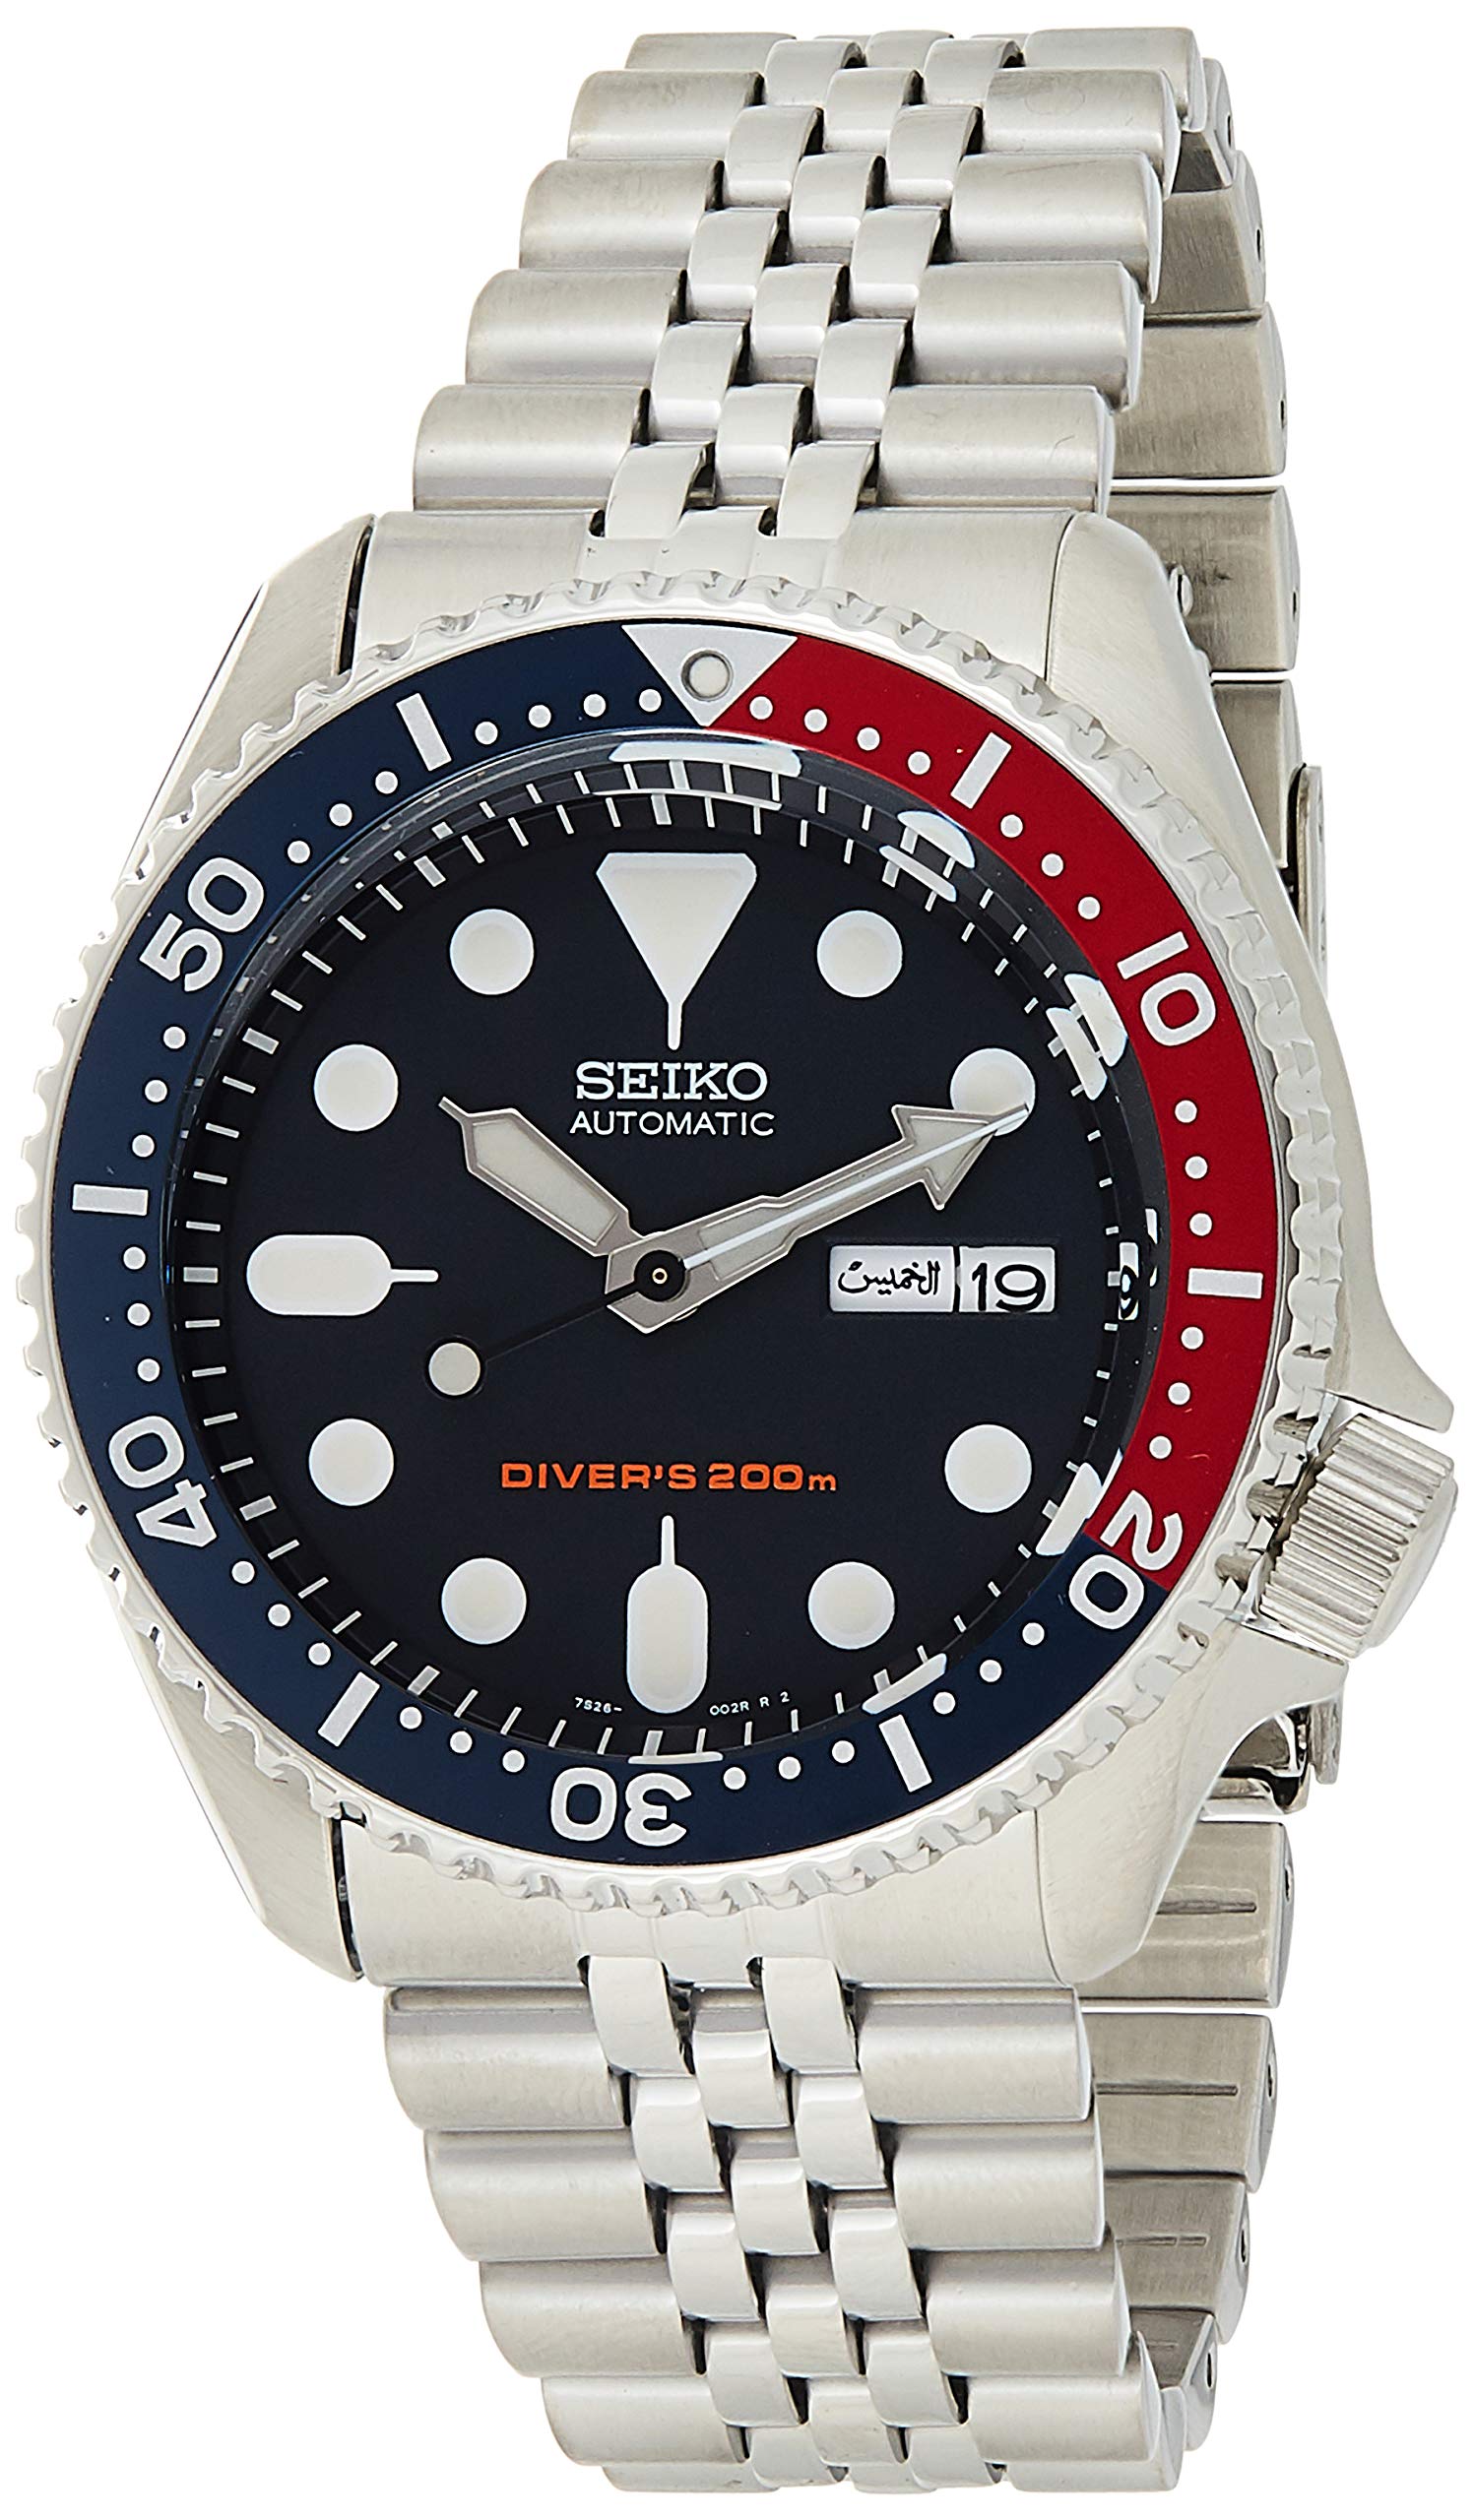 SEIKO Men's SKX009K2 Diver's Analog Automatic Stainless Steel Watch